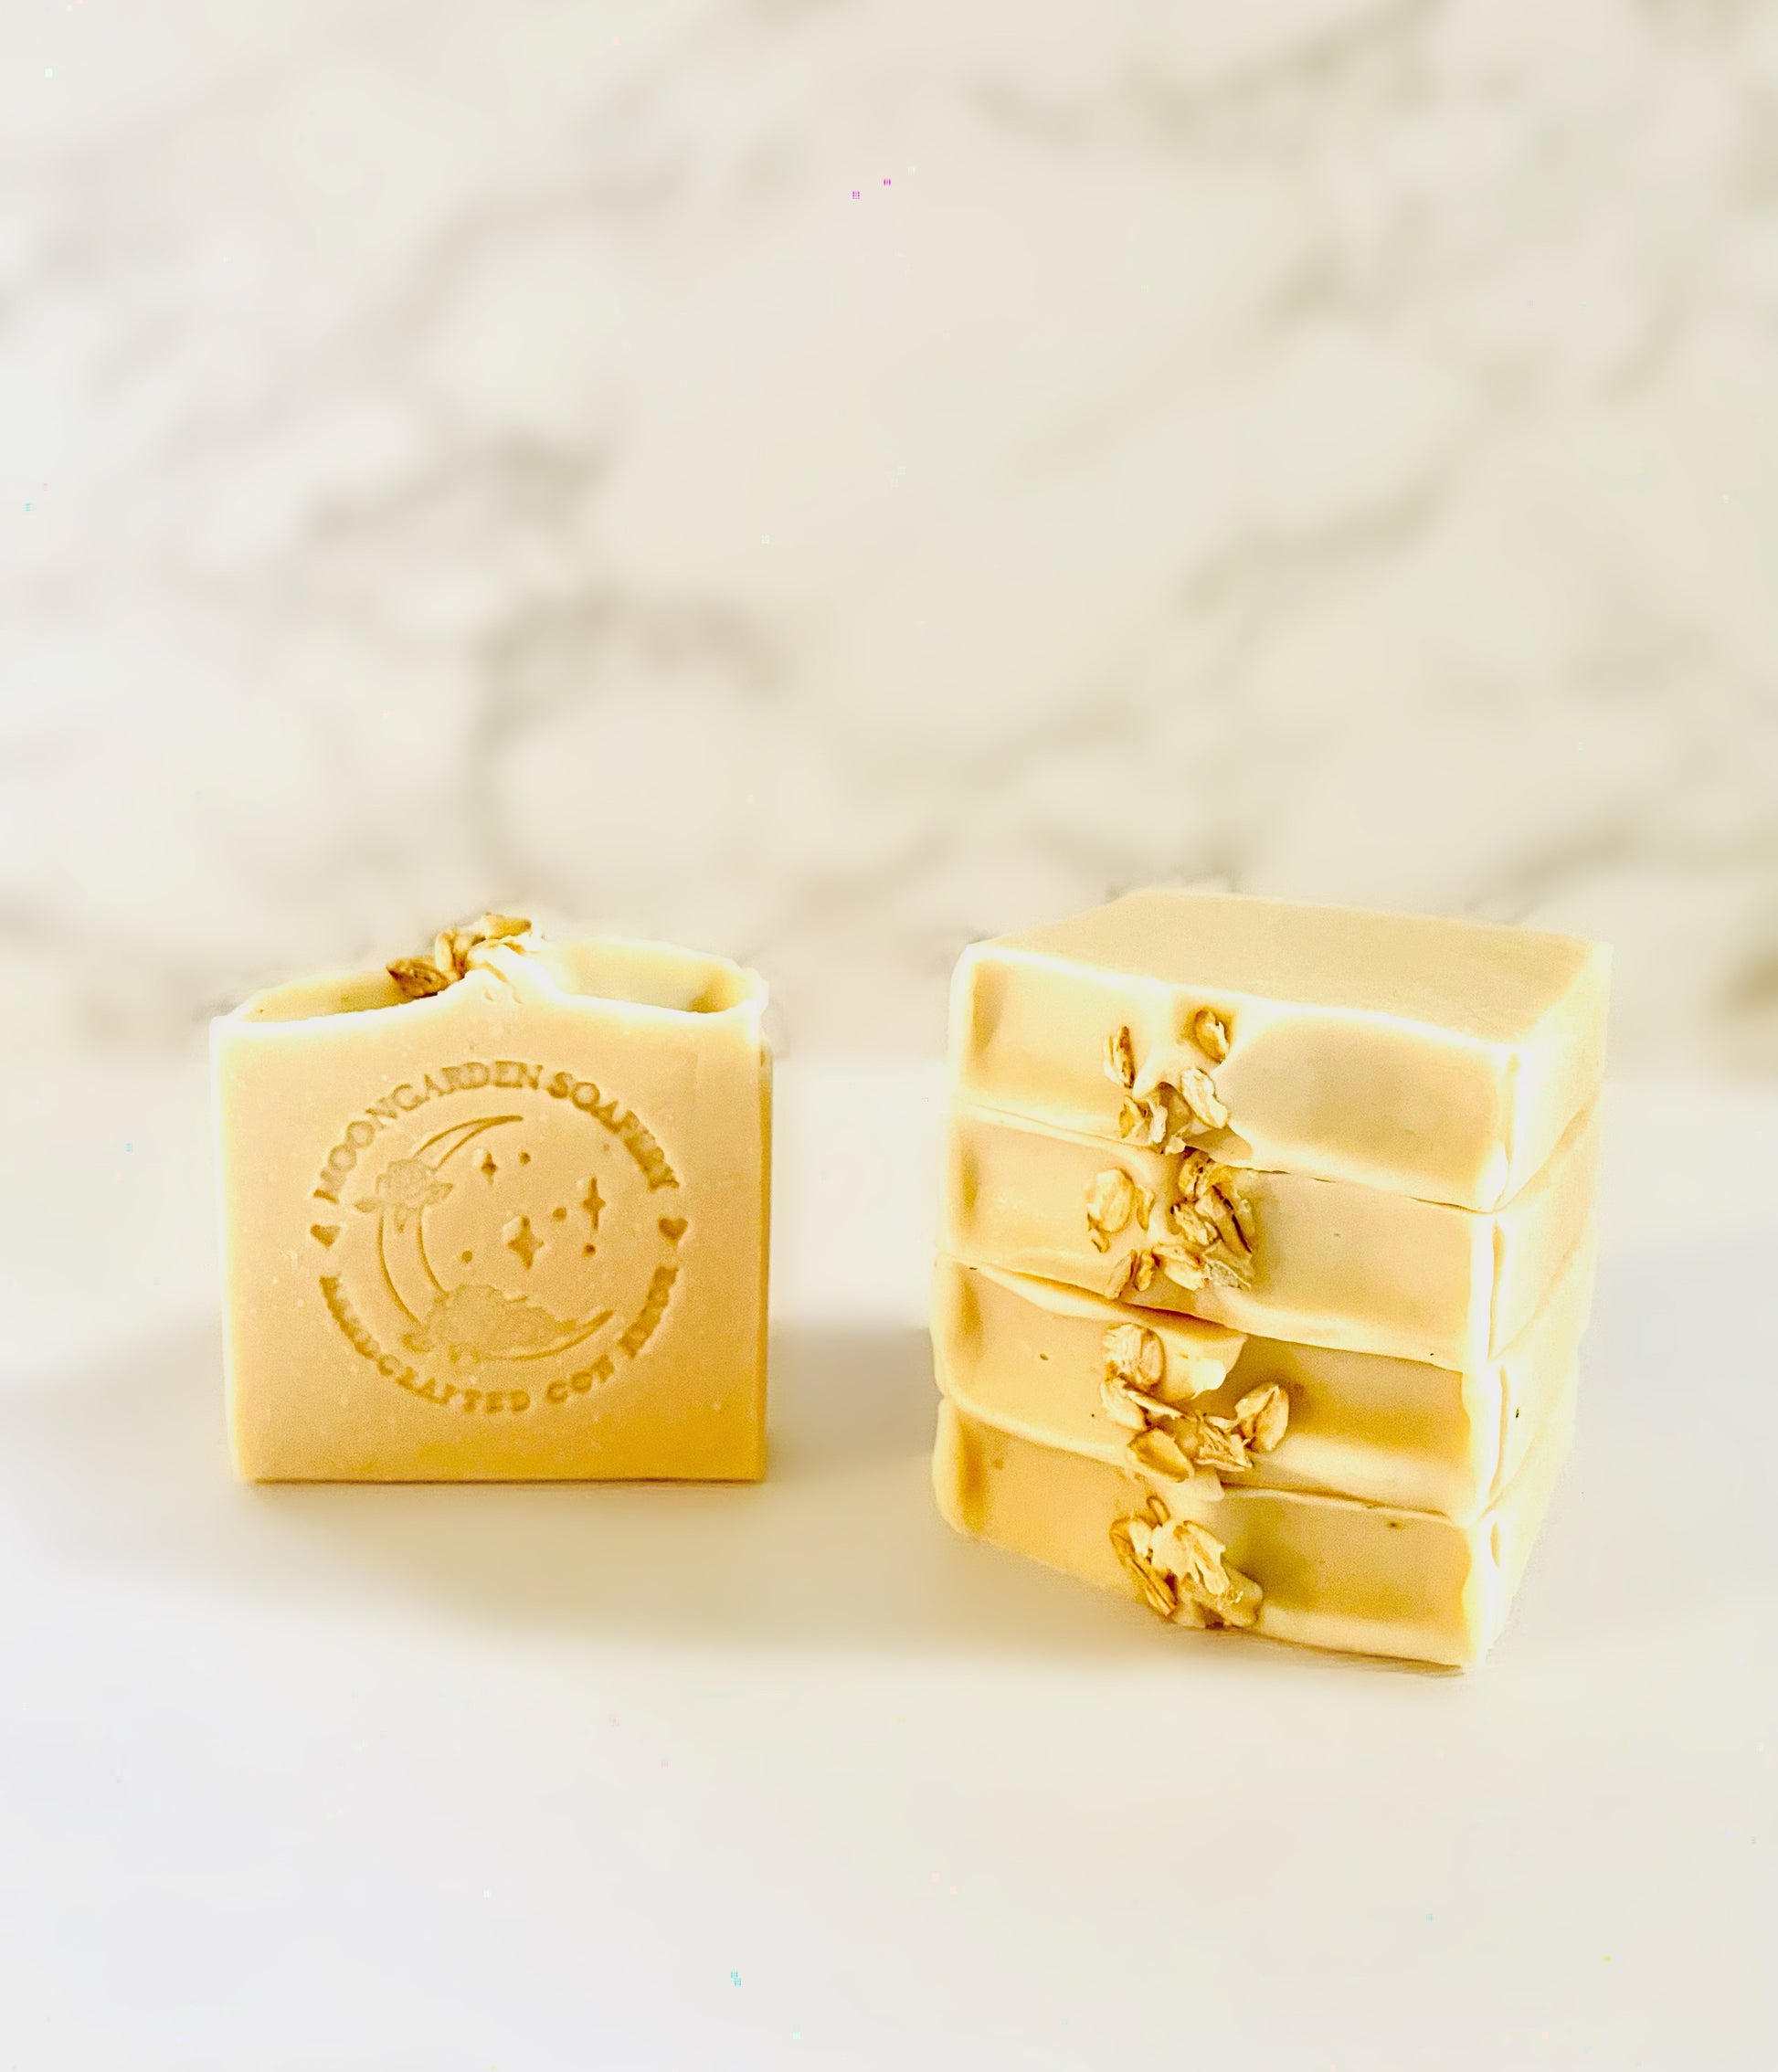 One oats and honey facial bar soap stands on the left. Four oats and honey facial bar soaps are stacked above each other on the right side. Each facial bar soap is topped with whole oats. All facial bar soaps sit on top of a marble backdrop. 